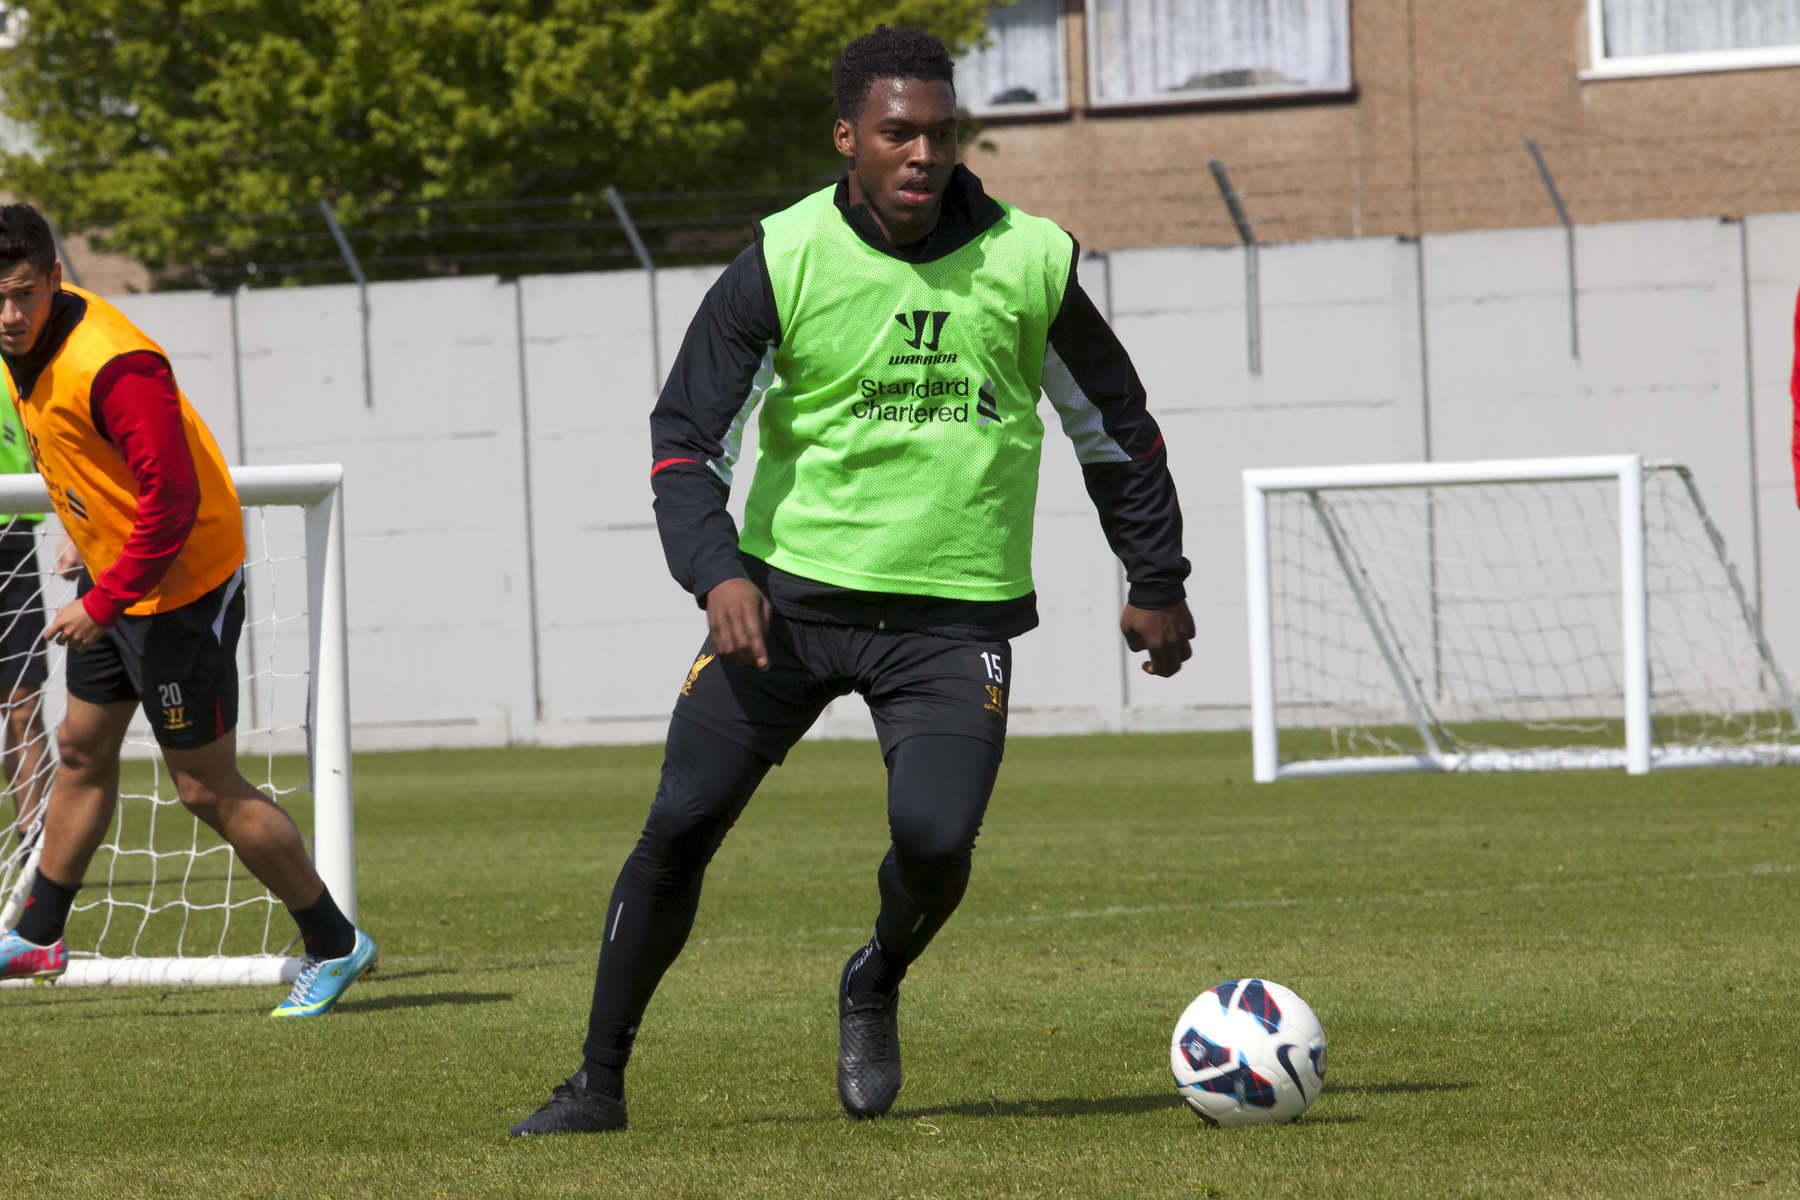 Liverpool FC forward Daniel Sturridge practices his skills at Melwood.Melwood is the Liverpool FC training ground, located in the West Derby area of Liverpool. It is seperate from the Liverpool Academy, which is based in Kirkby.Melwood was redeveloped in the early 2000′s with large input from then-manager Gerard Houllier and now features some of the best facilities in Europe. It has been the club’s training ground since the fifties and was previously transformed into a top class facility by Bill Shankly.Facilities include sythetic pitches, rehabilitation rooms, press and meeting rooms, gymnasium, swimming pool, restaurant and recreational facilities.